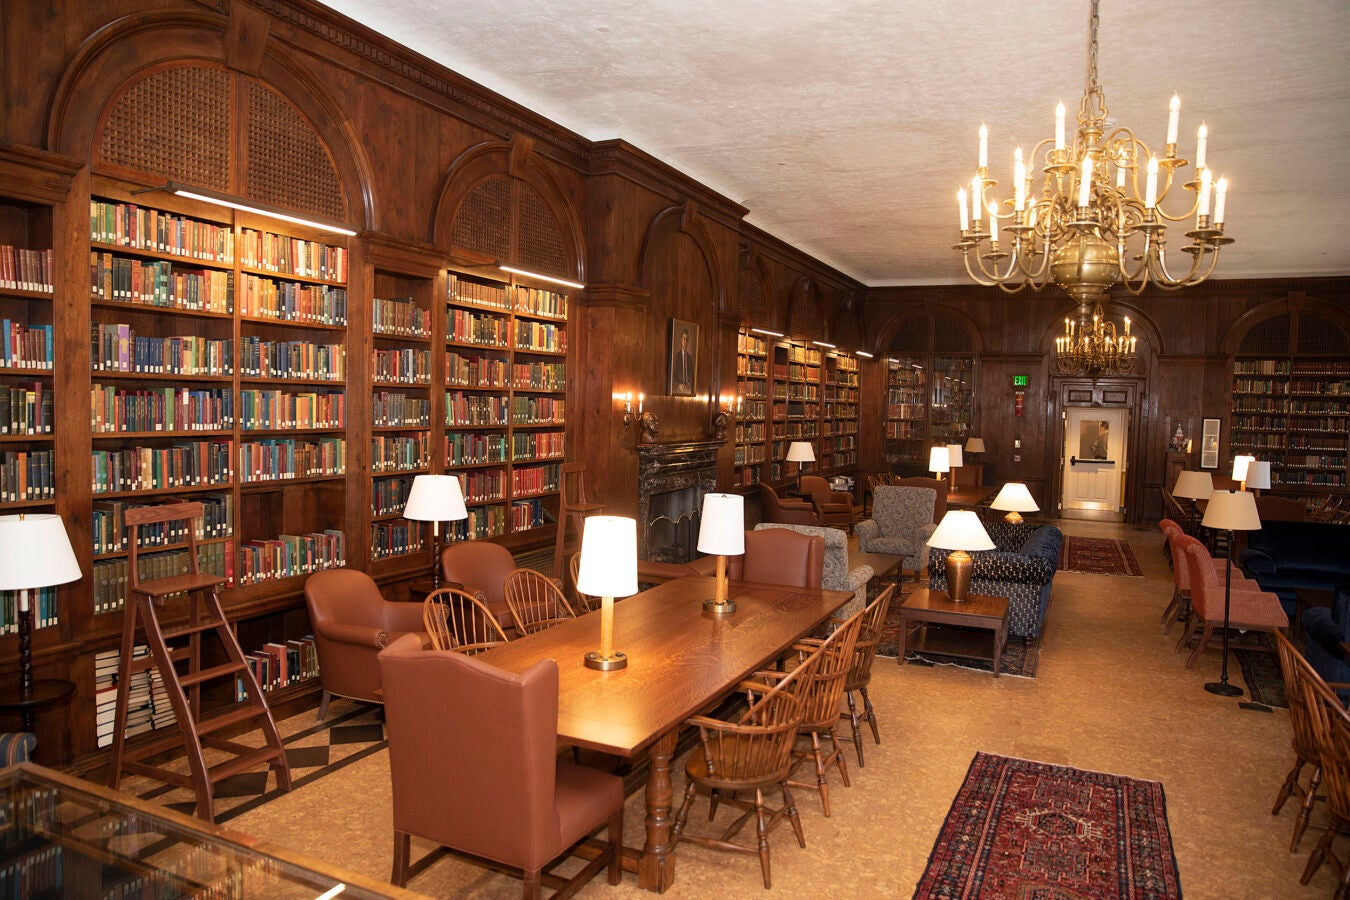 Lowell House's library